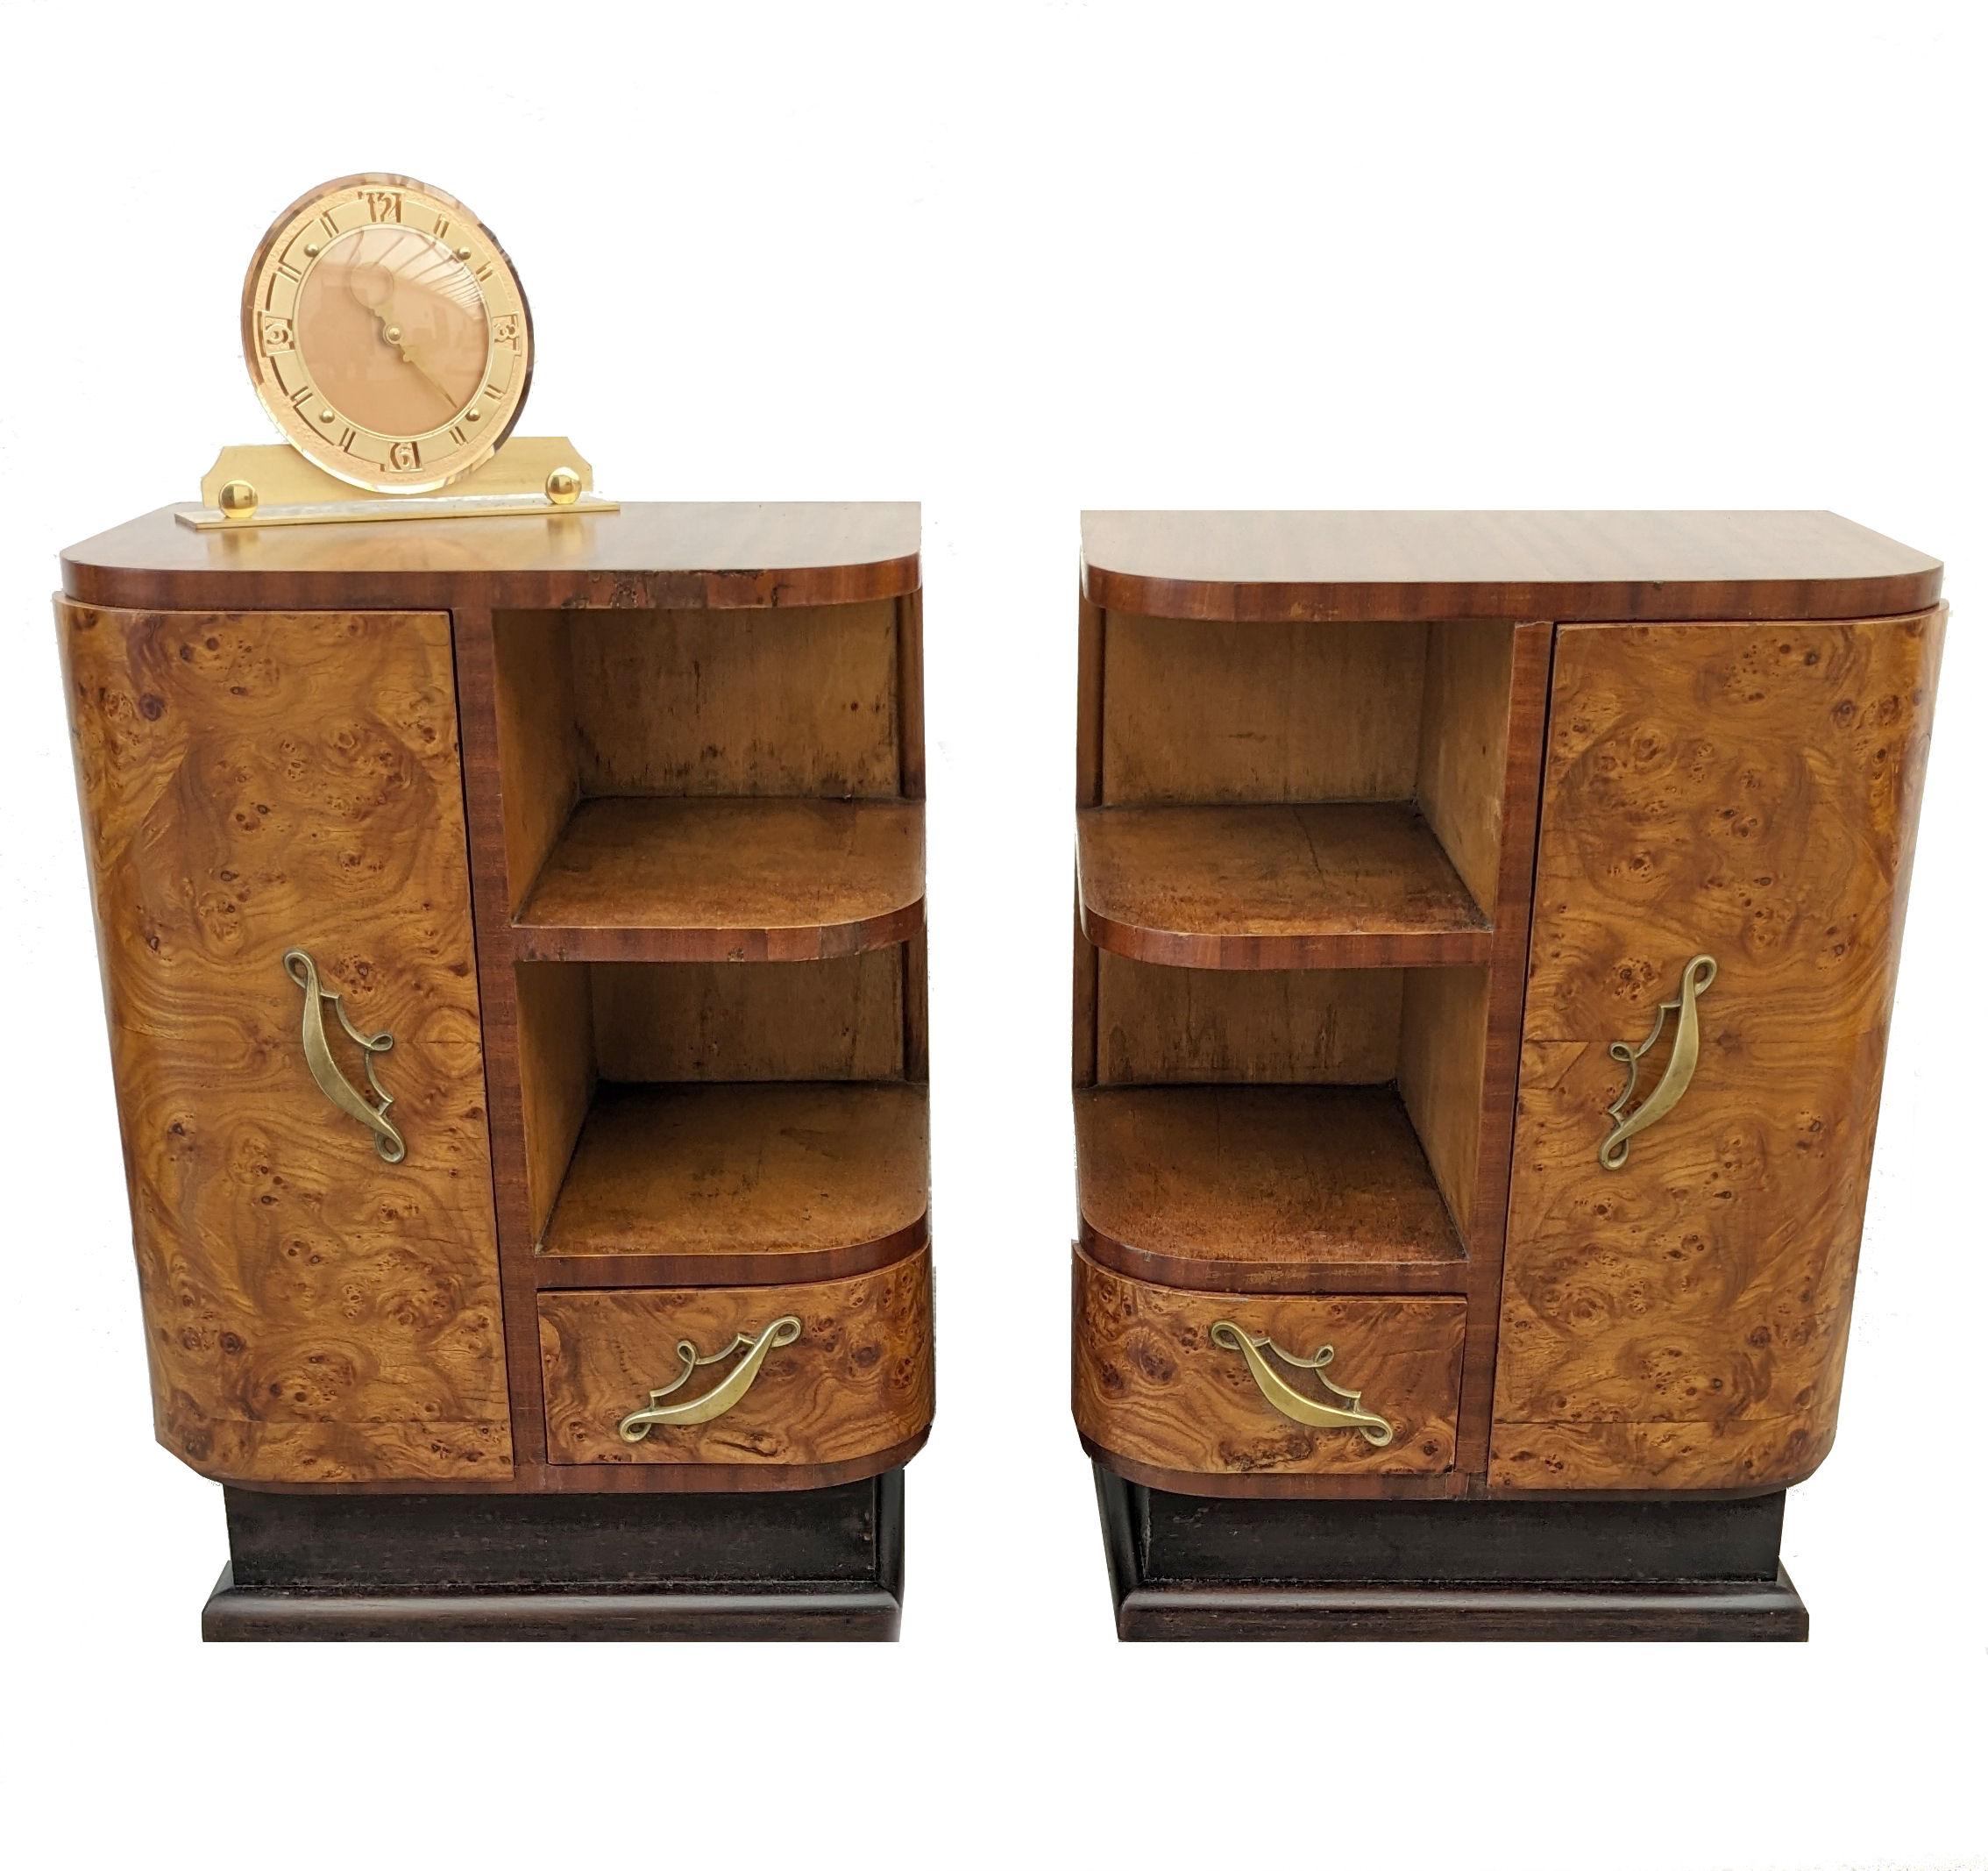 A rare opportunity to acquire such high styled and totally original Art Deco bedside tables. Originating from Italy and dating to the early 1930s they fill both the highly desired shape of Art Deco at its best and sort after the luscious veneers